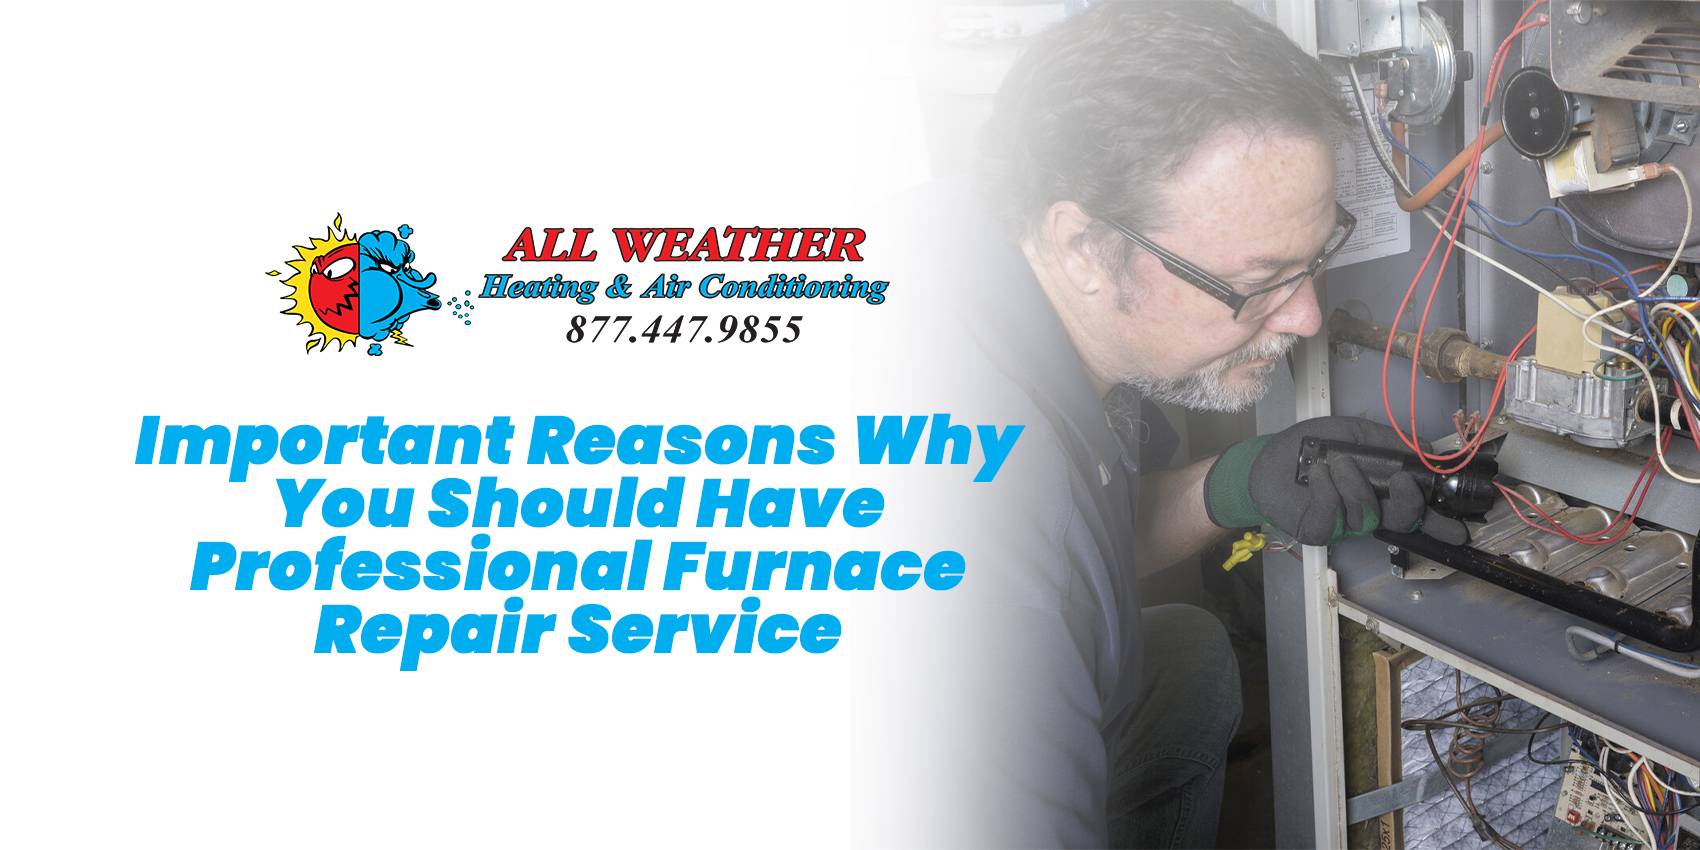 Important reasons why you should have professional furnace repair service